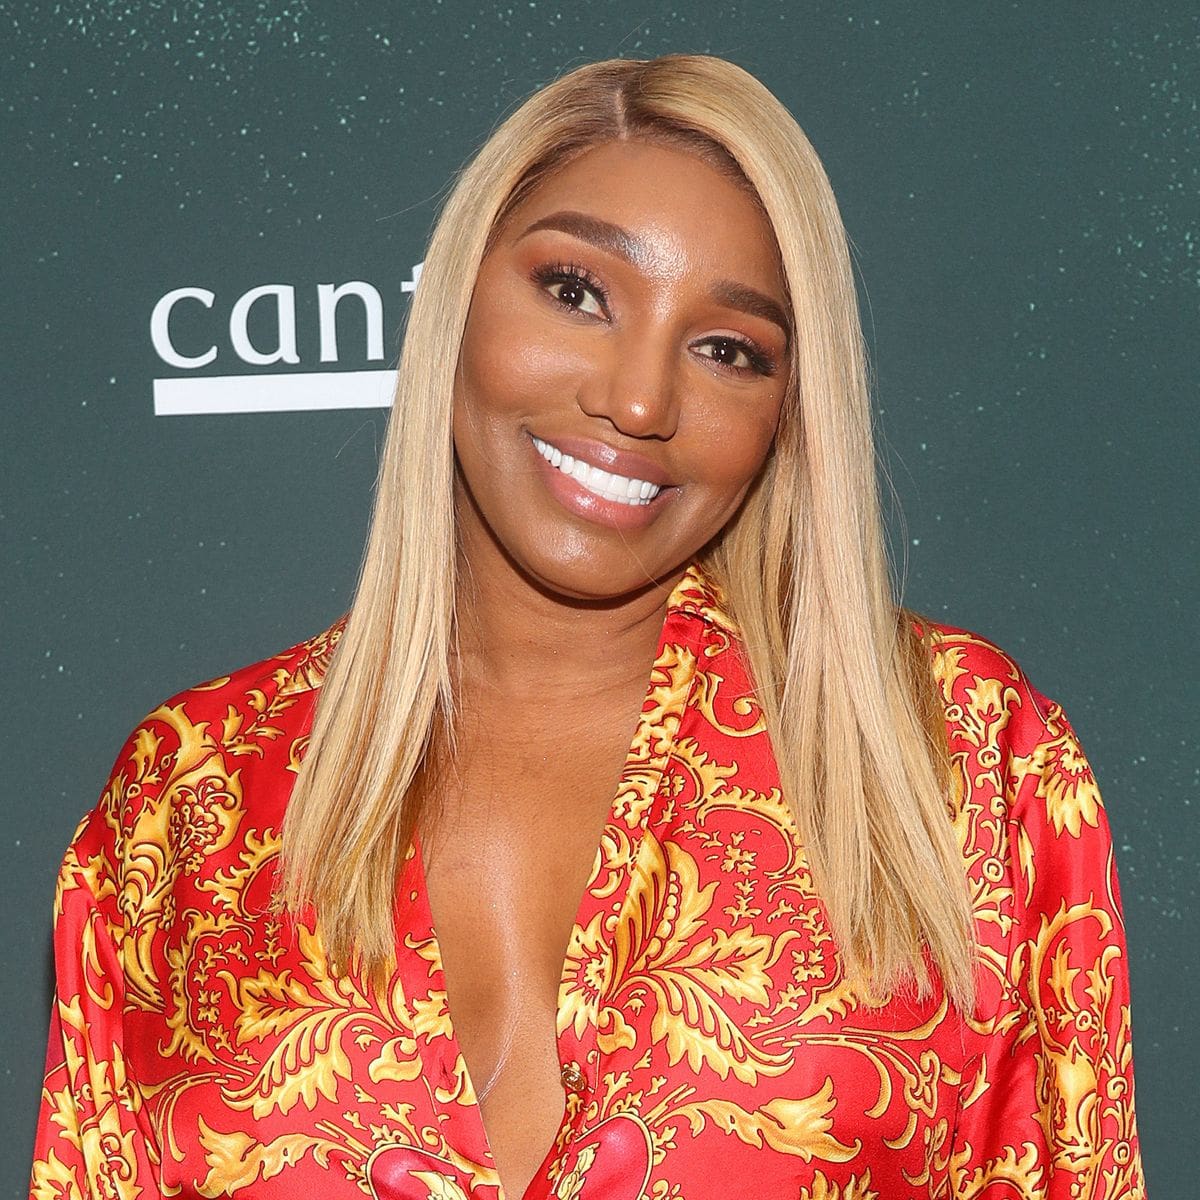 ”nene-leakes-is-addressing-the-comments-that-claudia-jordan-recently-made-about-her-see-this-video”